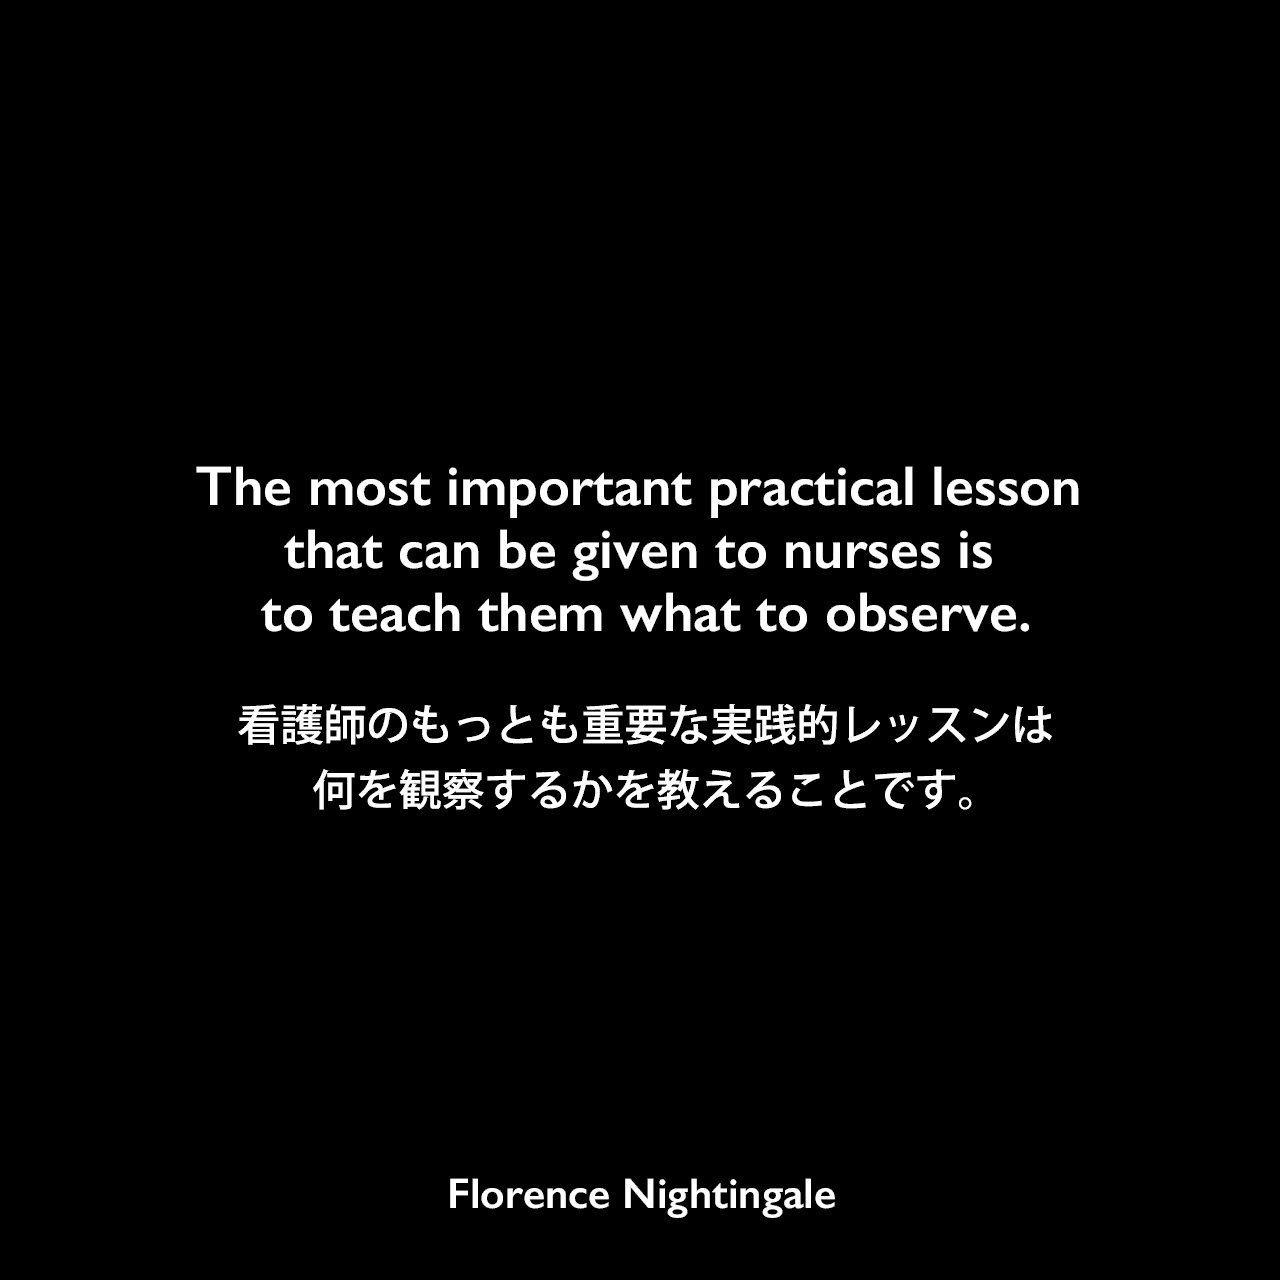 The most important practical lesson that can be given to nurses is to teach them what to observe.看護師のもっとも重要な実践的レッスンは、何を観察するかを教えることです。